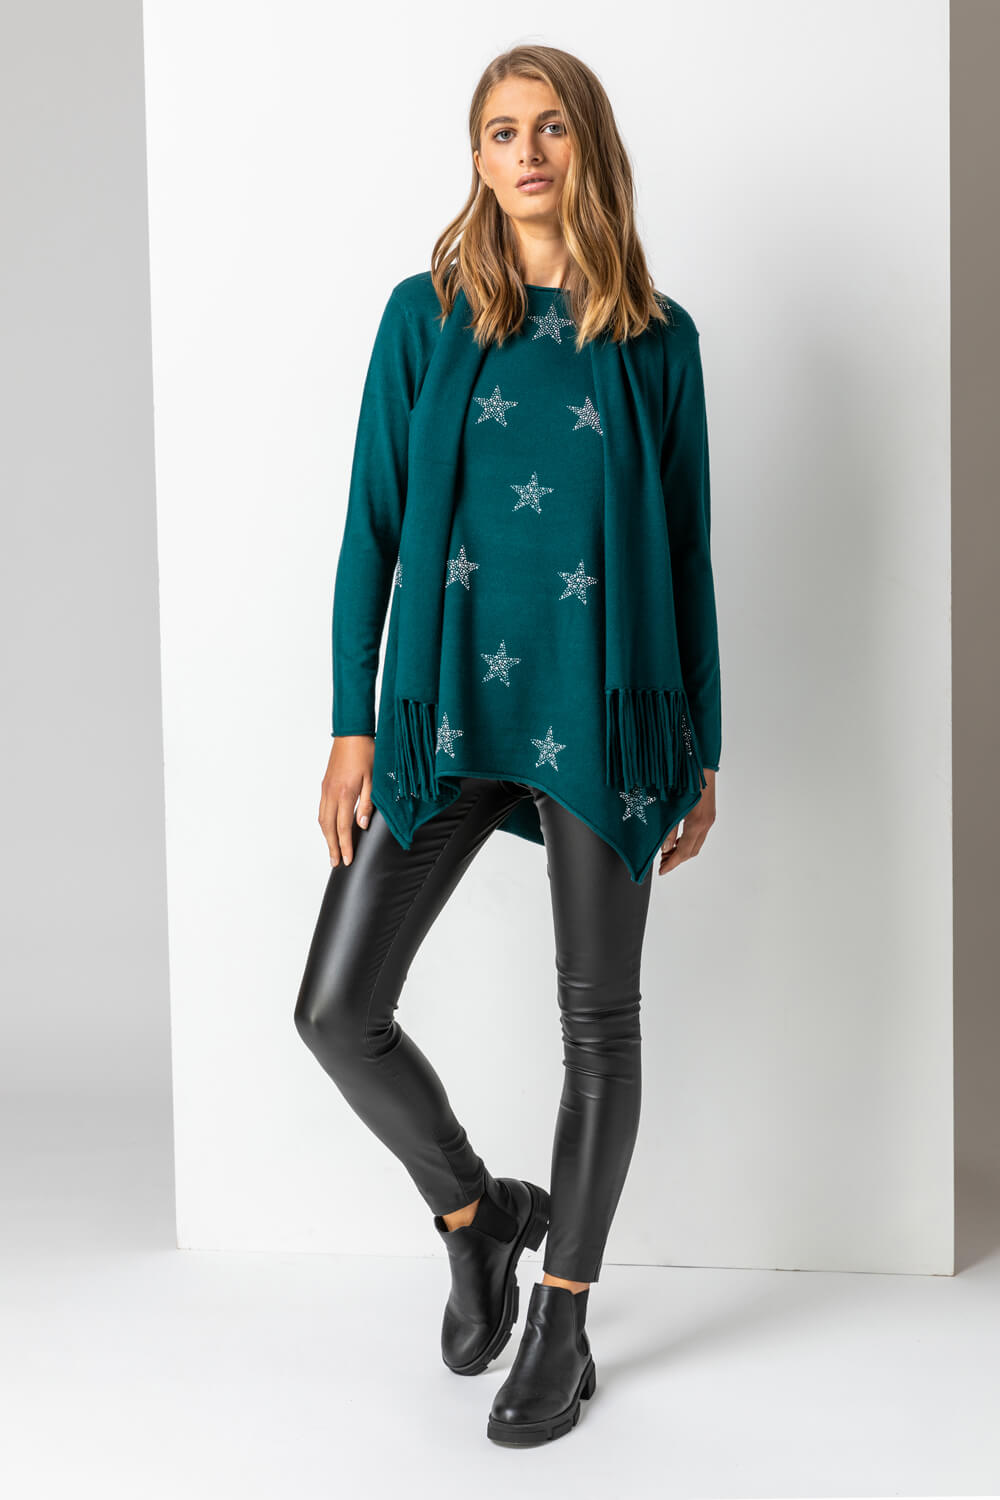 Teal Star Print Knitted Tunic with Tassel Scarf, Image 3 of 5